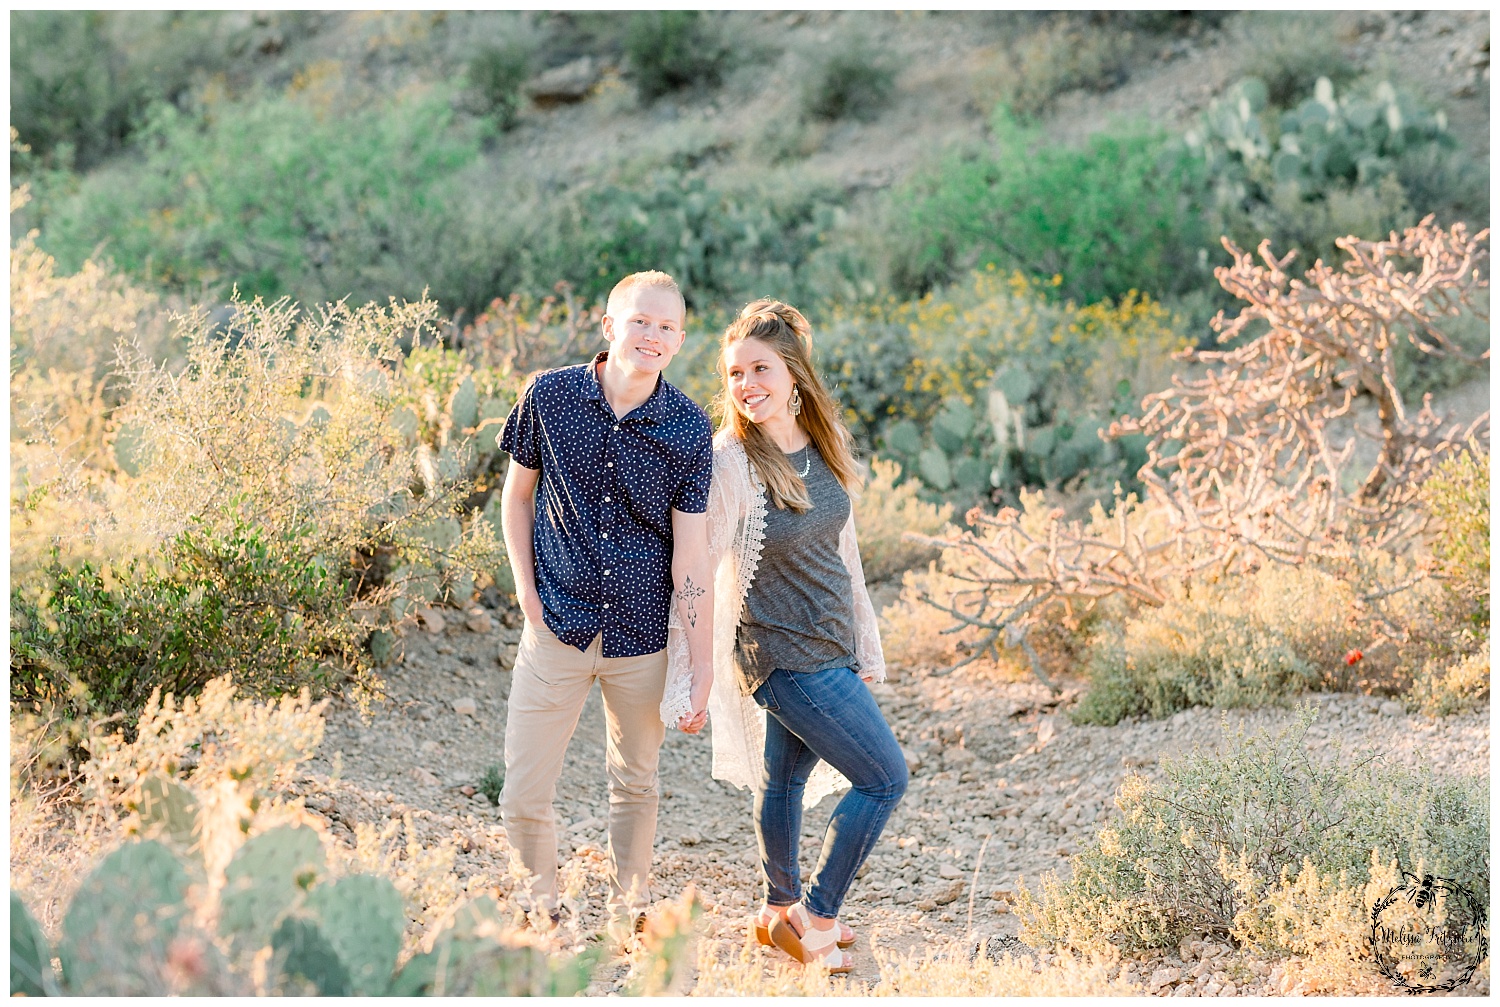 Adorable couple, Madi and Riley, at their engagement session in Tucson, Arizona